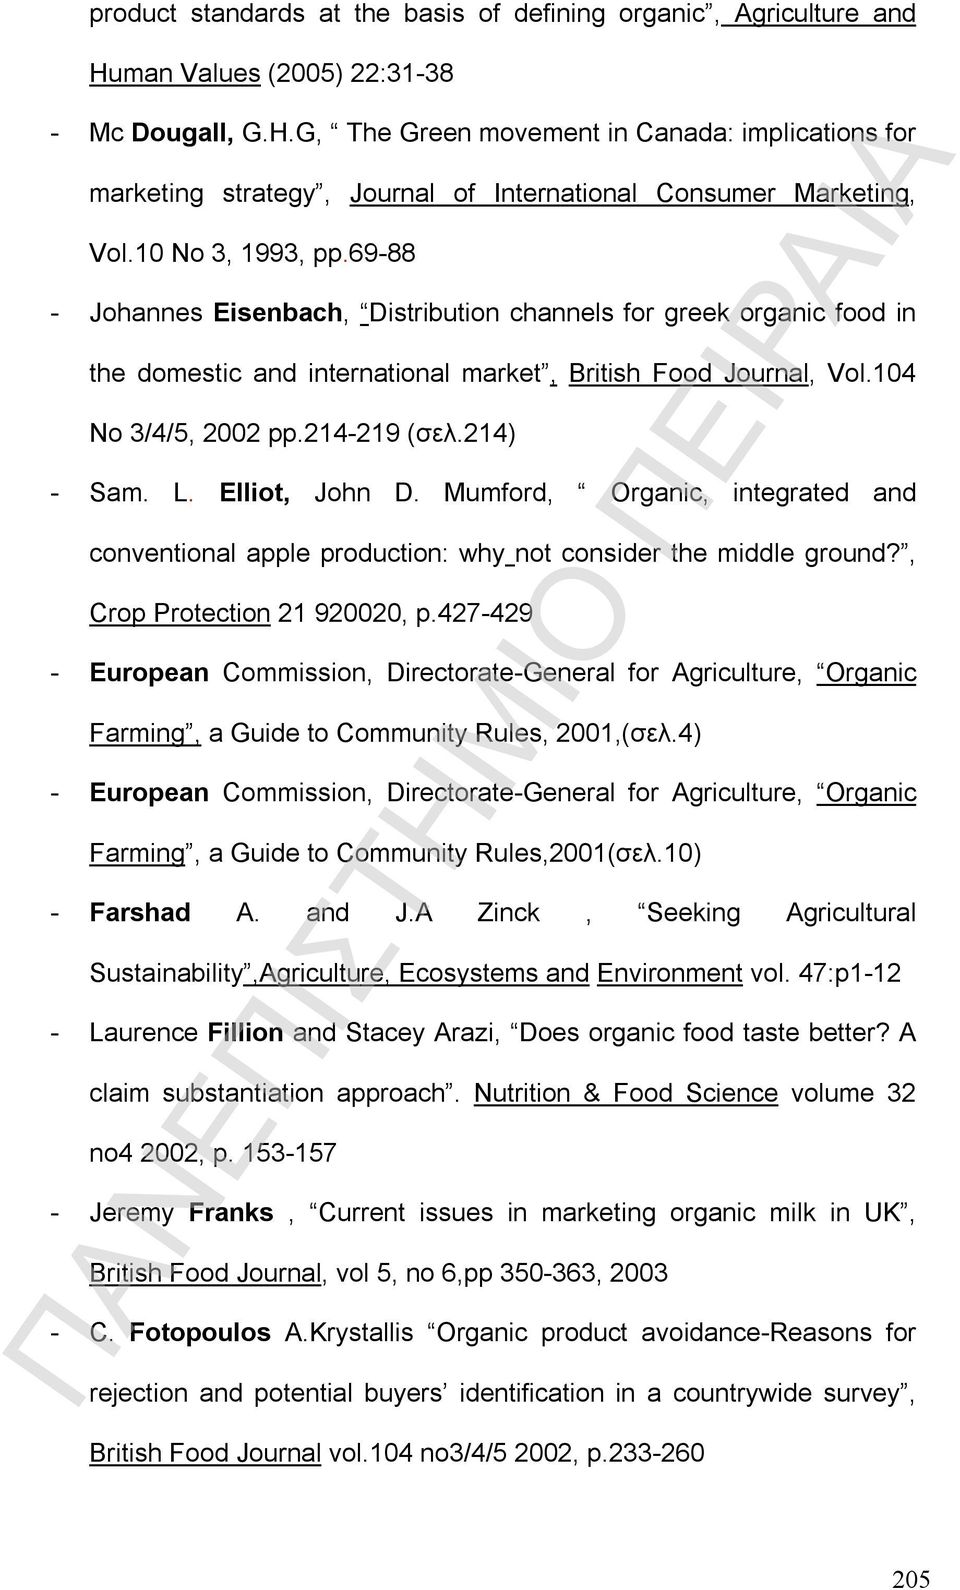 214) - Sam. L. Elliot, John D. Mumford, Organic, integrated and conventional apple production: why not consider the middle ground?, Crop Protection 21 920020, p.